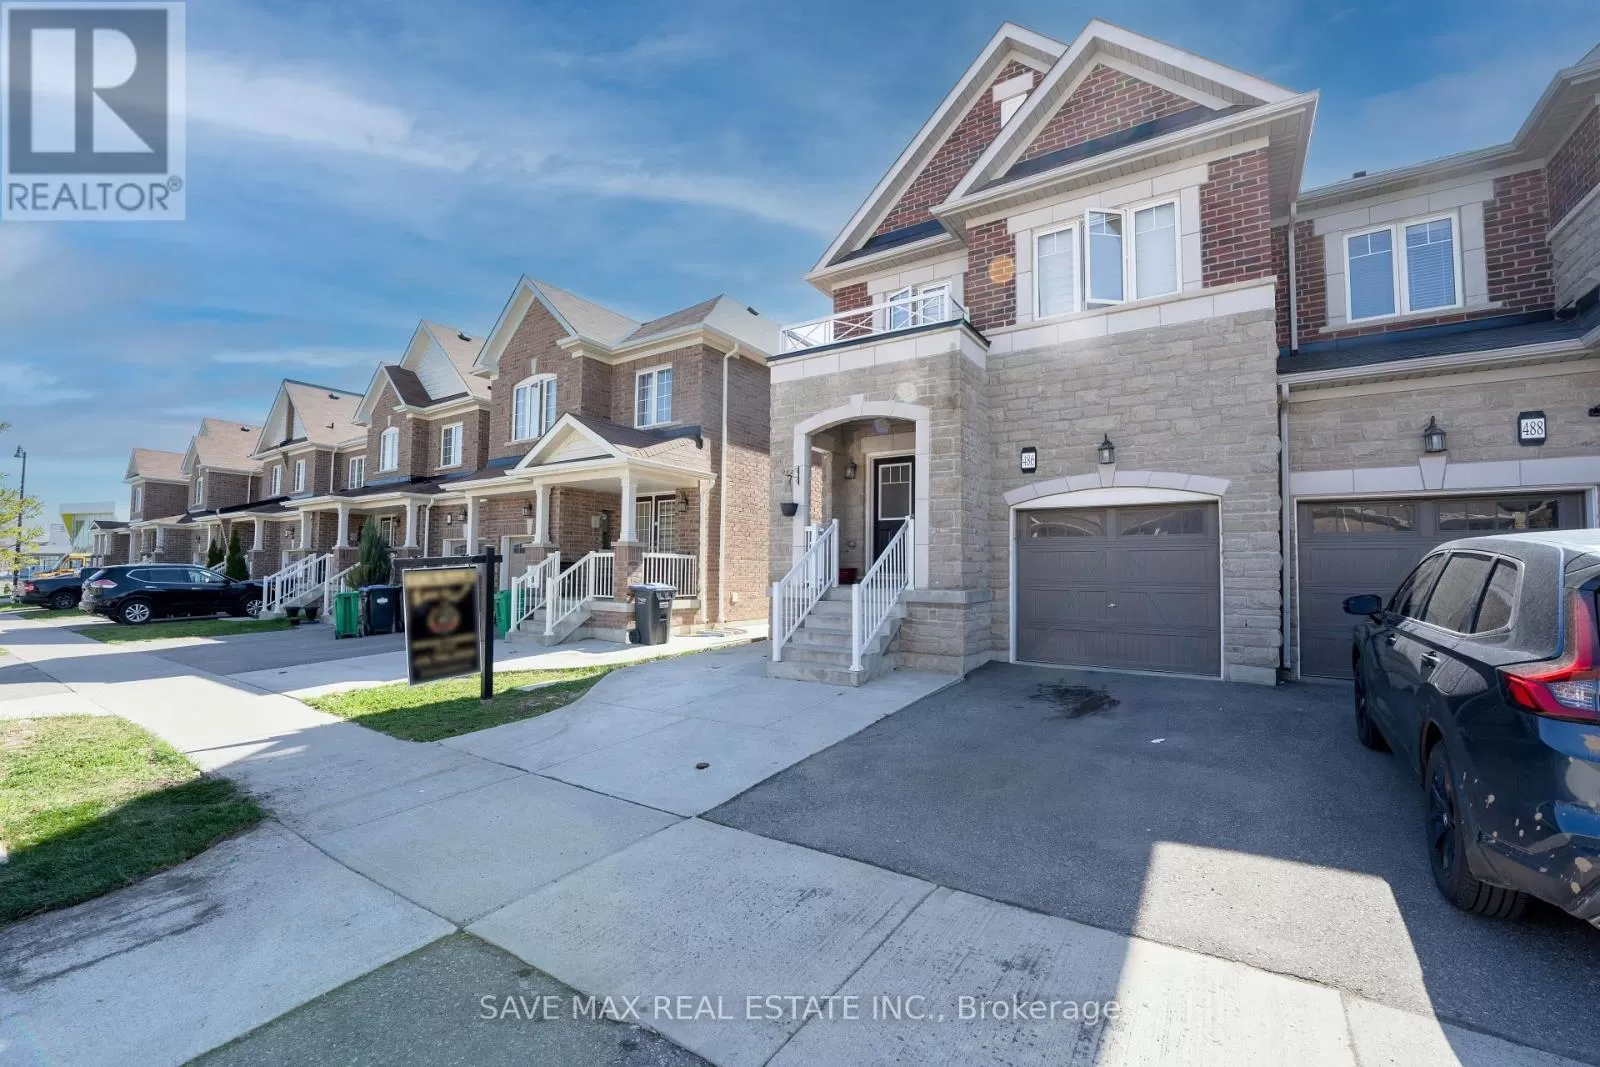 Row / Townhouse for rent: 486 Queen Mary Dr, Brampton, Ontario L7A 4N3